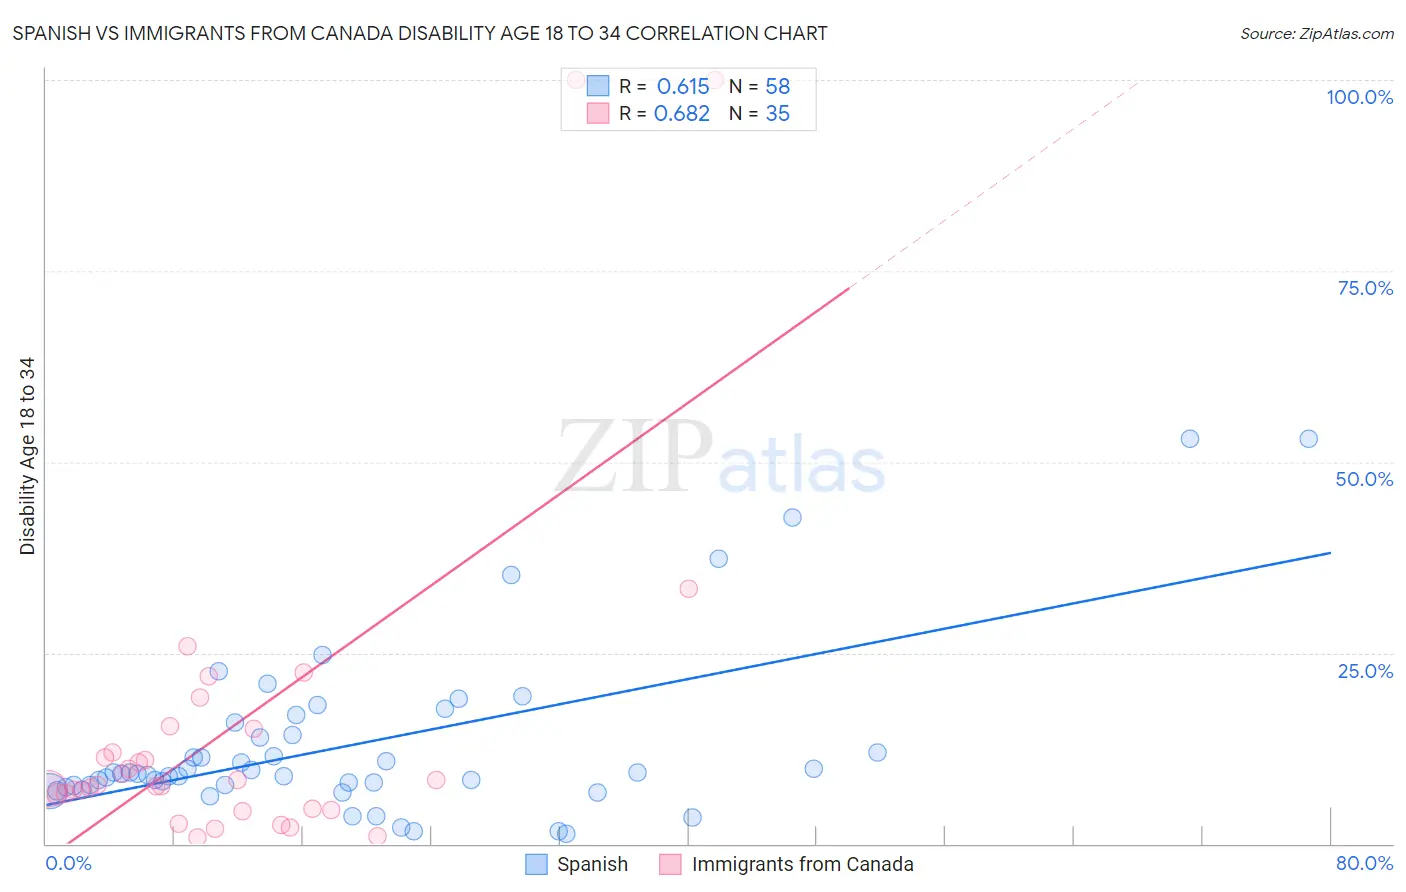 Spanish vs Immigrants from Canada Disability Age 18 to 34